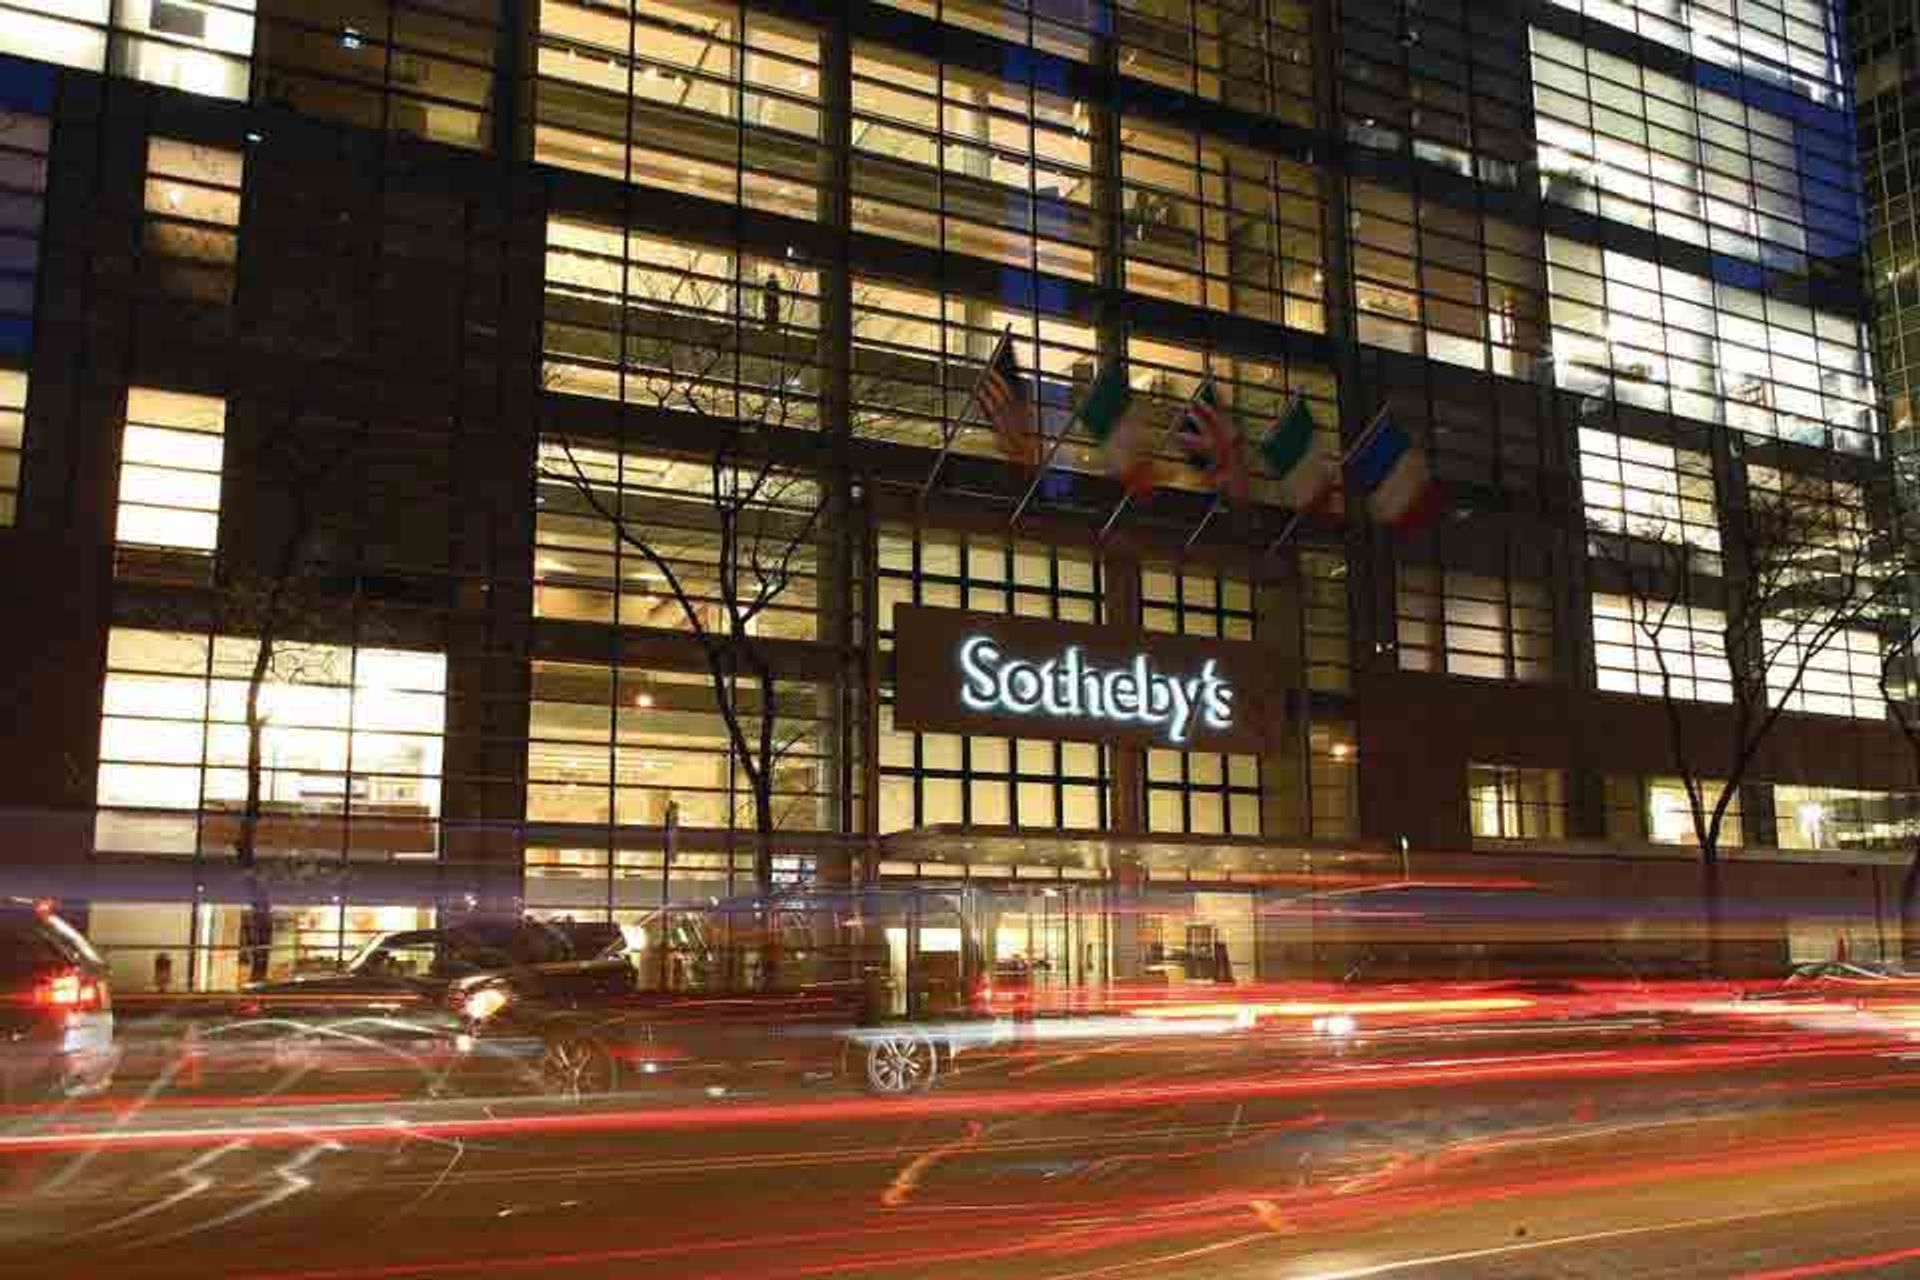 Sotheby's New York headquarters Courtesy of Sotheby's